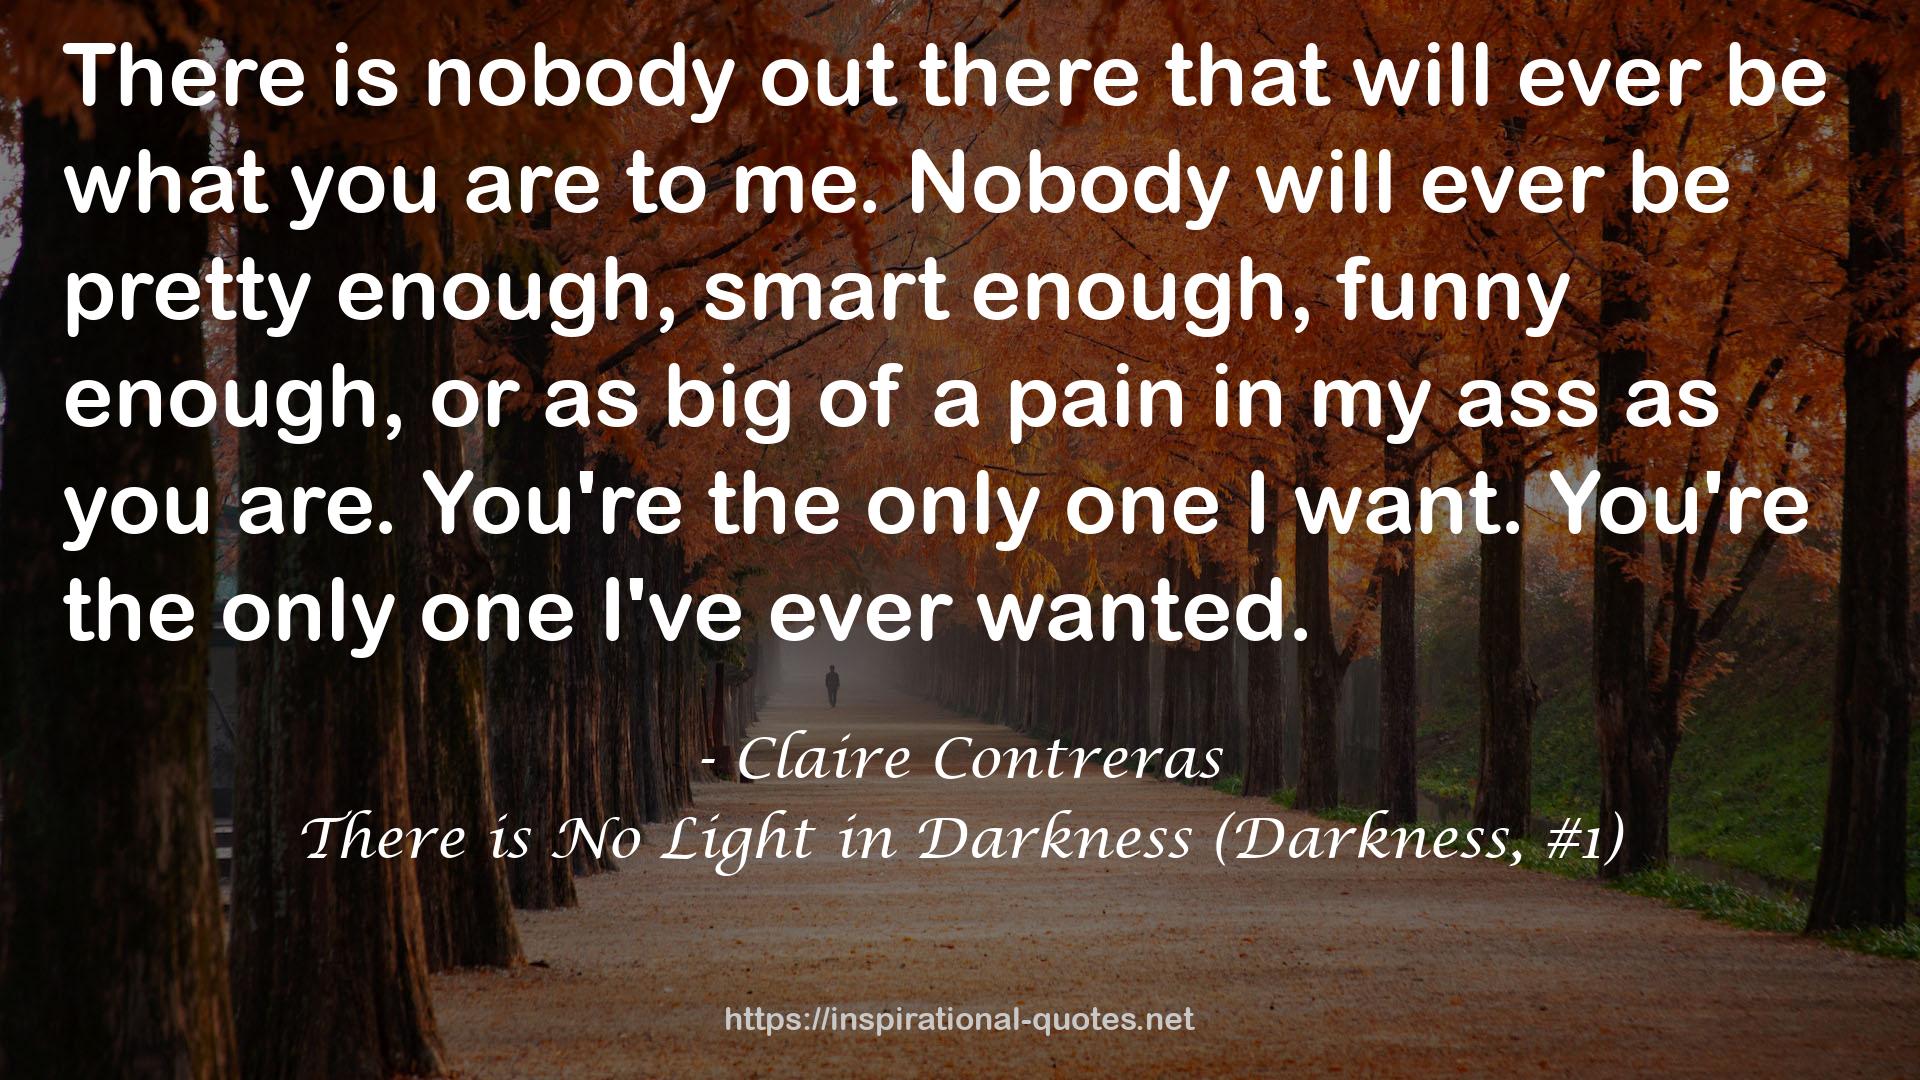 There is No Light in Darkness (Darkness, #1) QUOTES